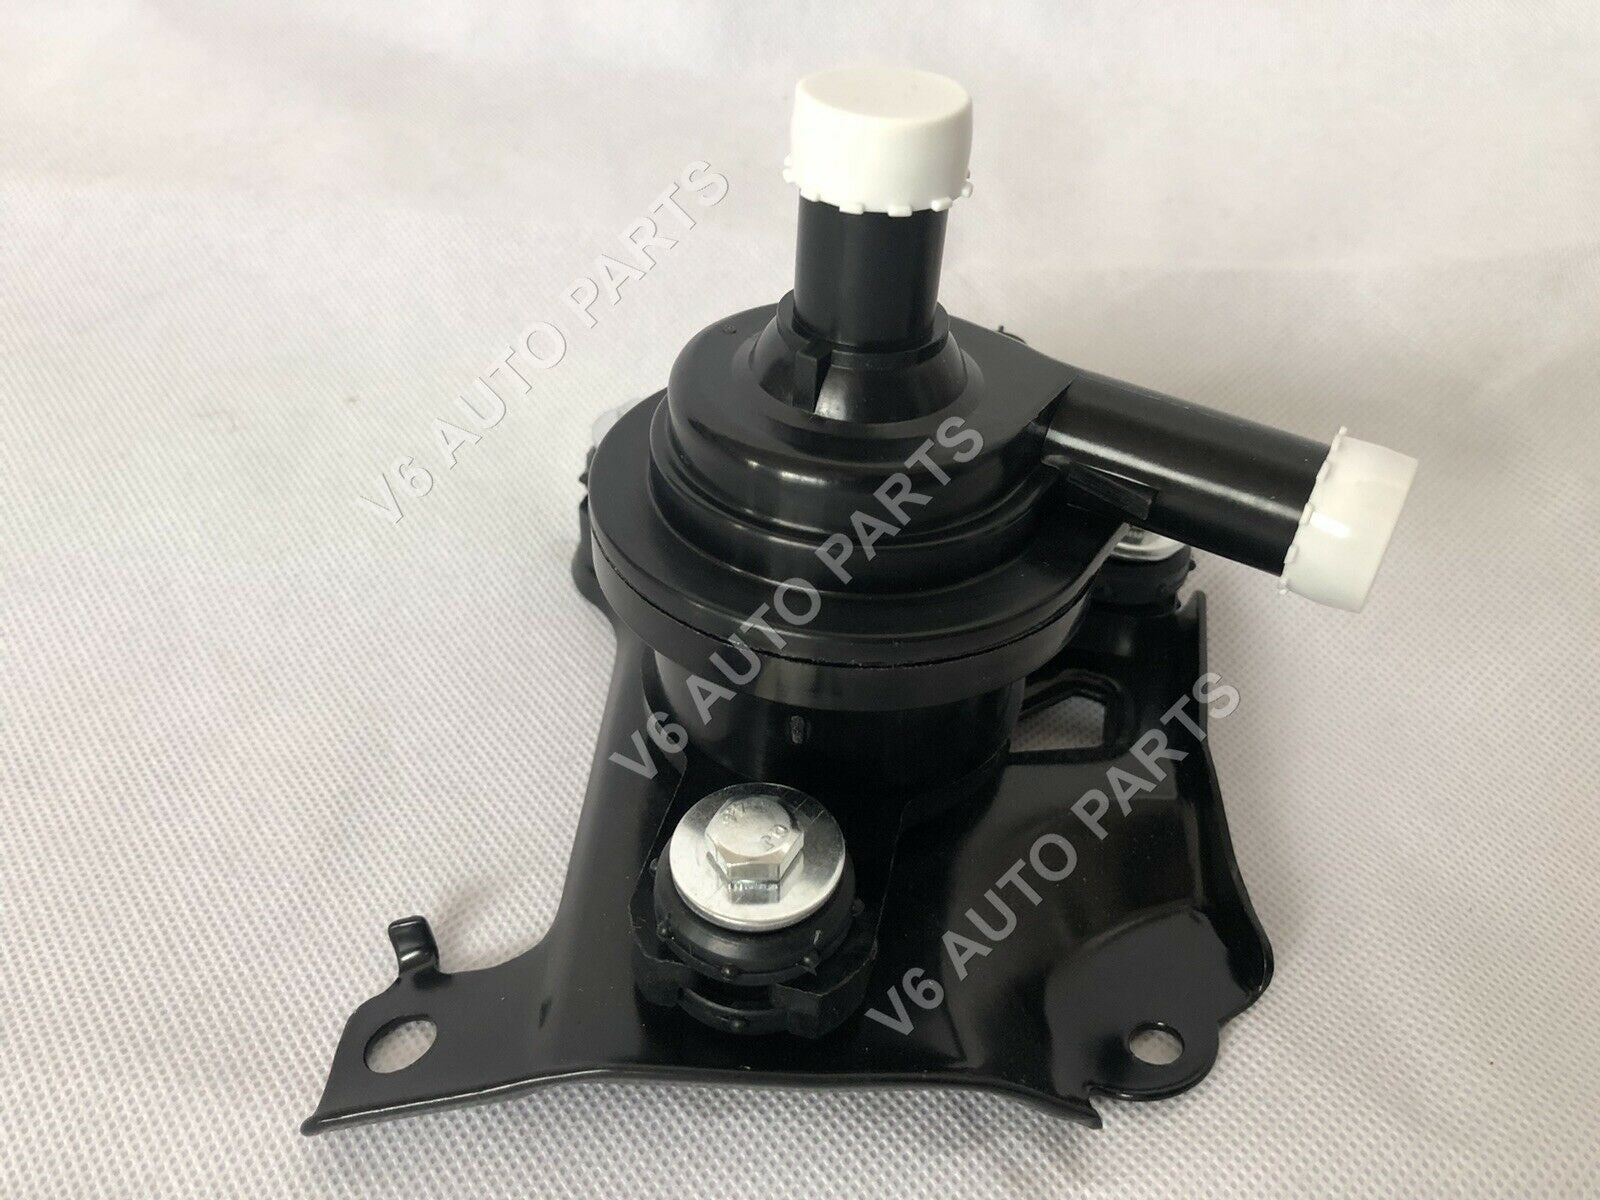 04000-32528 Electric Inverter Cooling Water Pump For 2004 - 2009 Toyota Prius Hatchback 1.5L